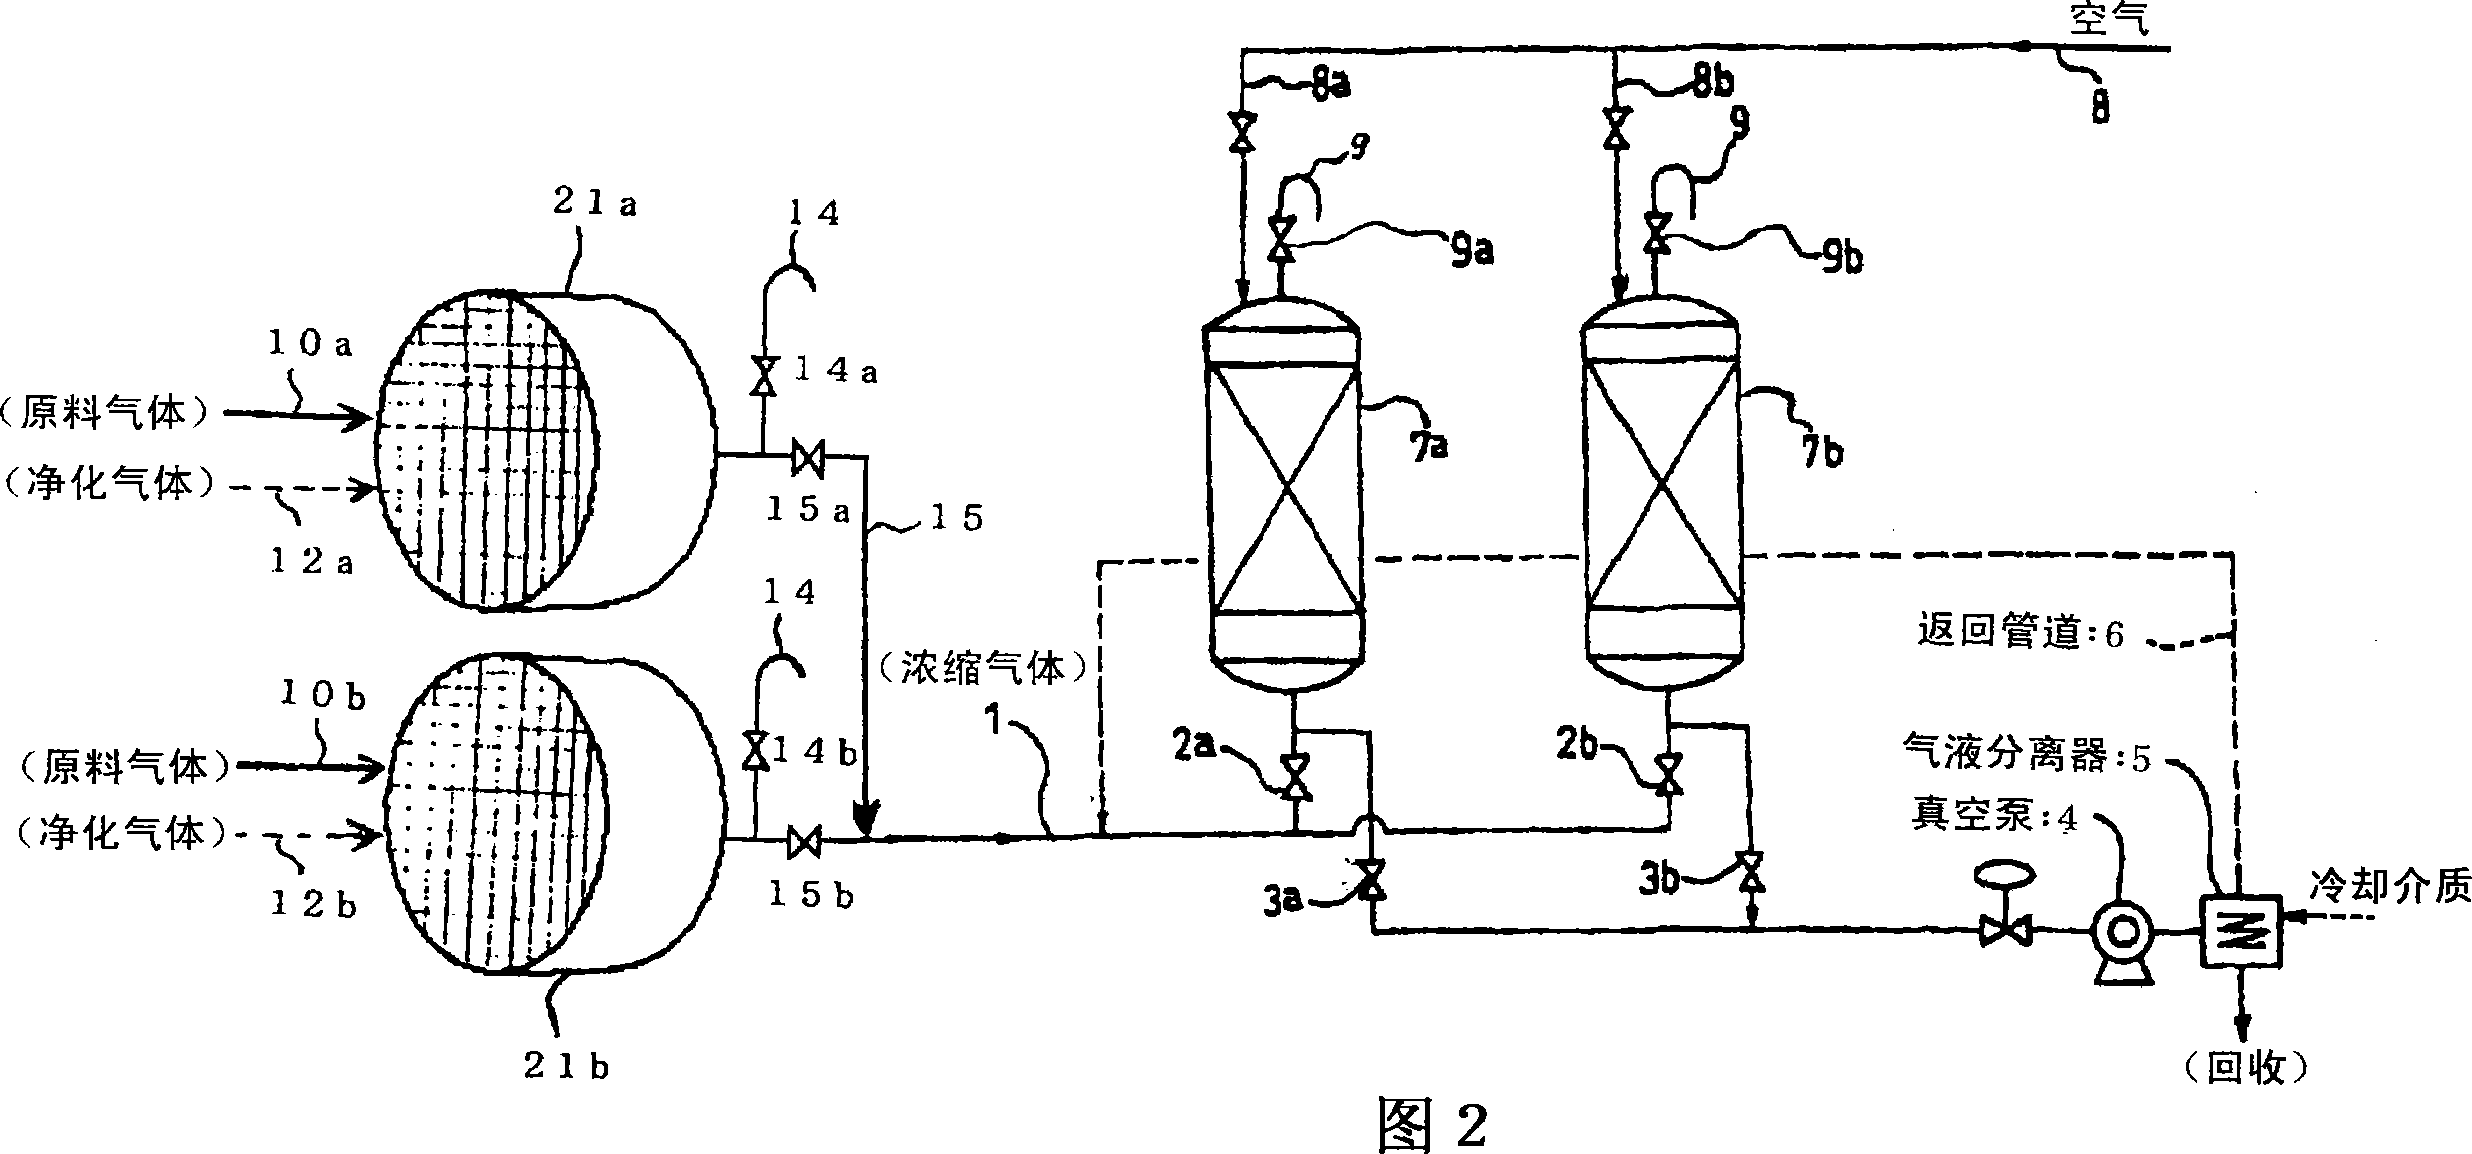 Method of purifying large quantity of exhaust gas containing dilute volatile hydrocarbon